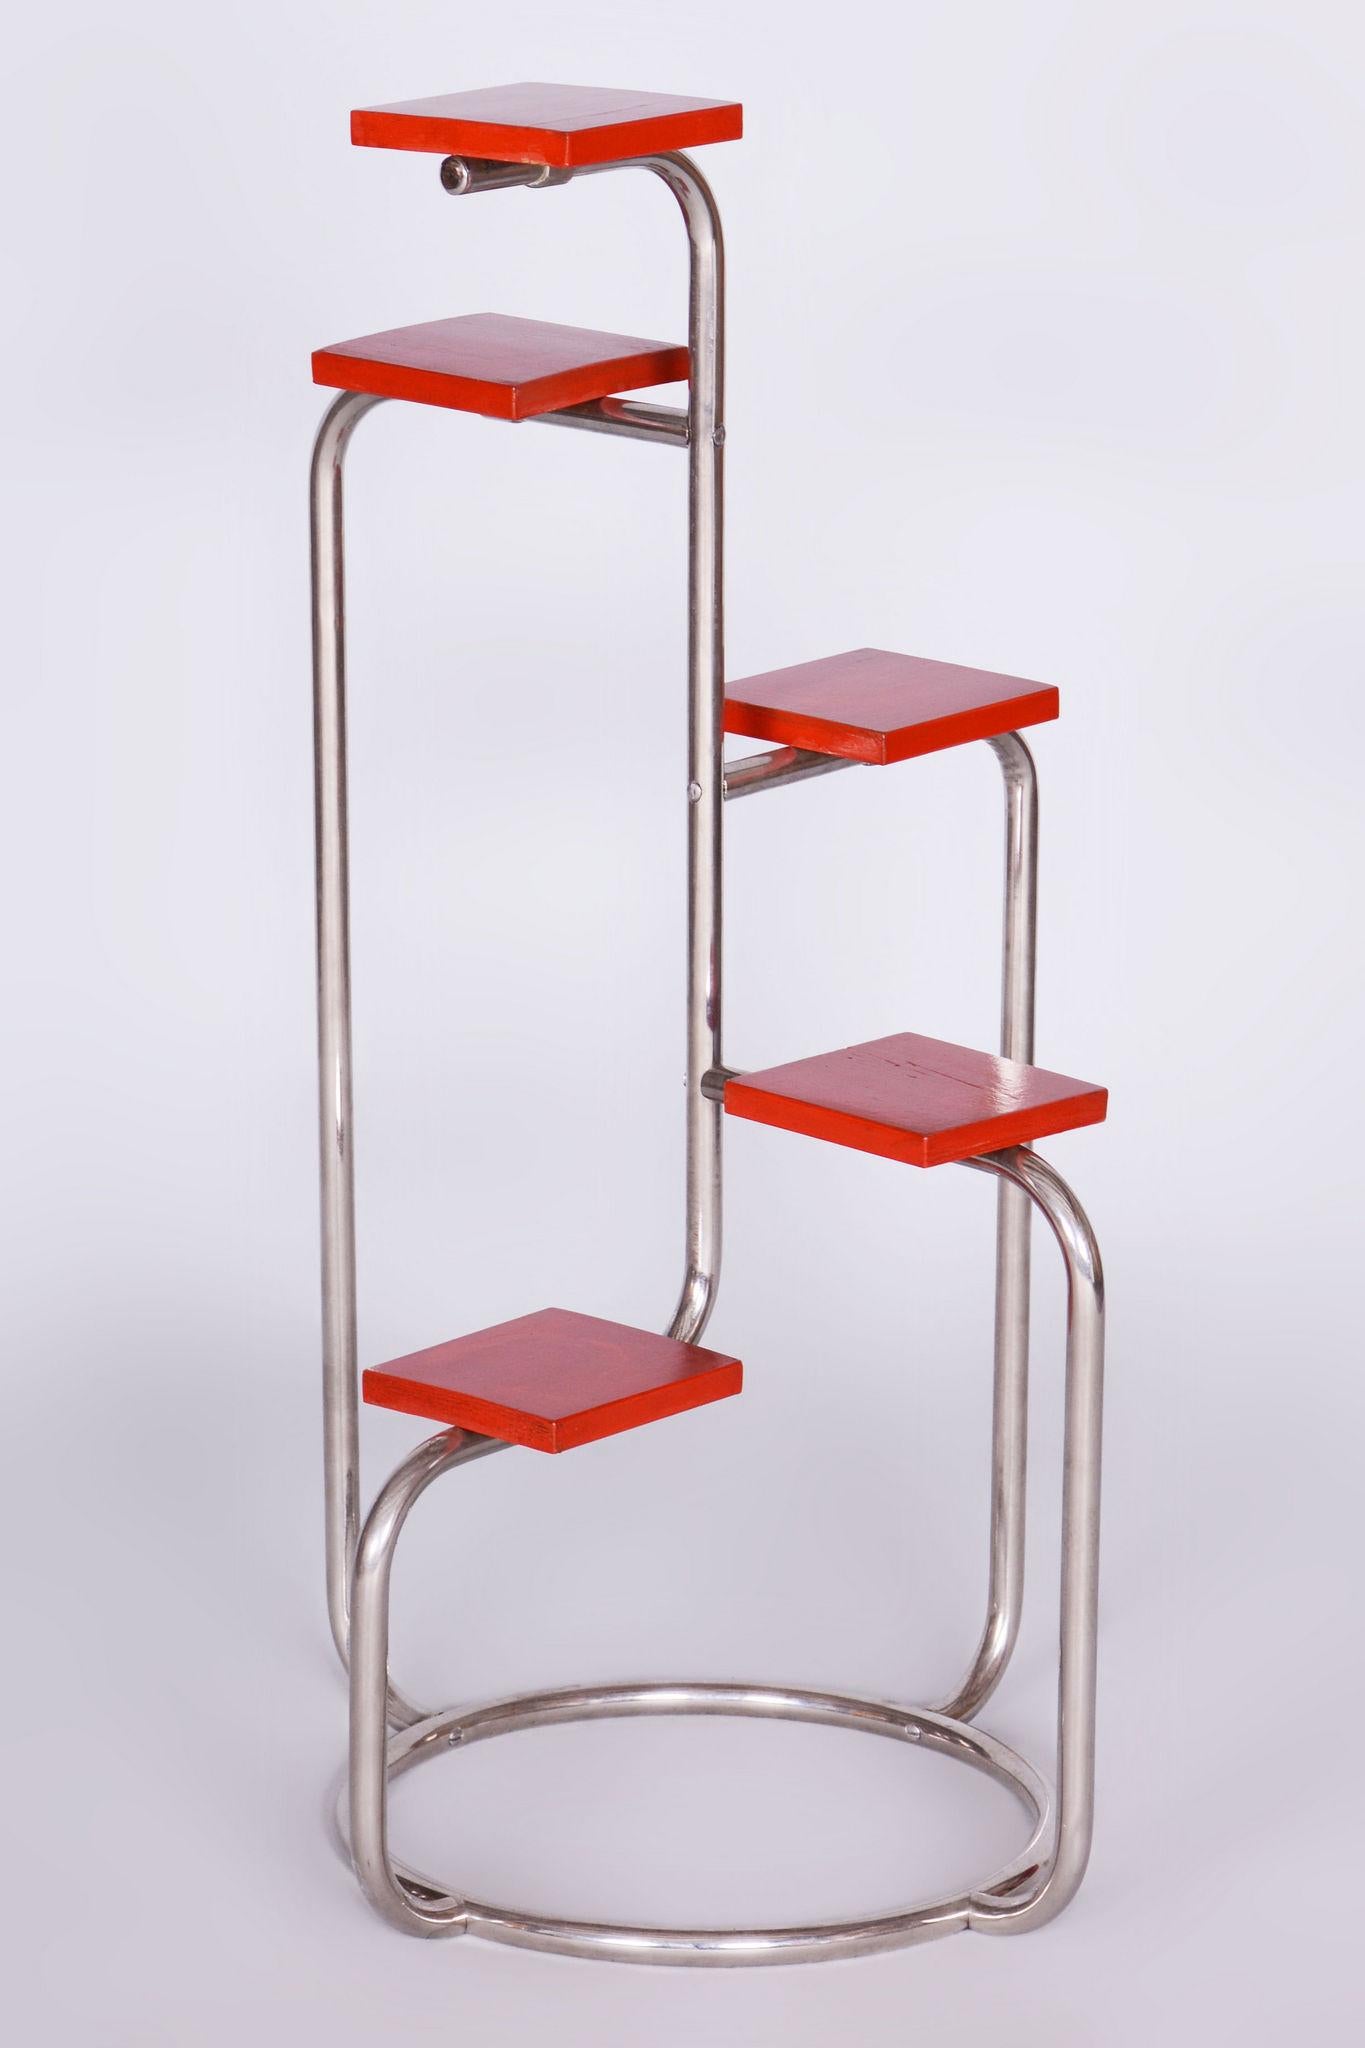 Unusual Bauhaus Chrome Flower Stand, Lacquered Wood, Czechia, 1930s For Sale 2